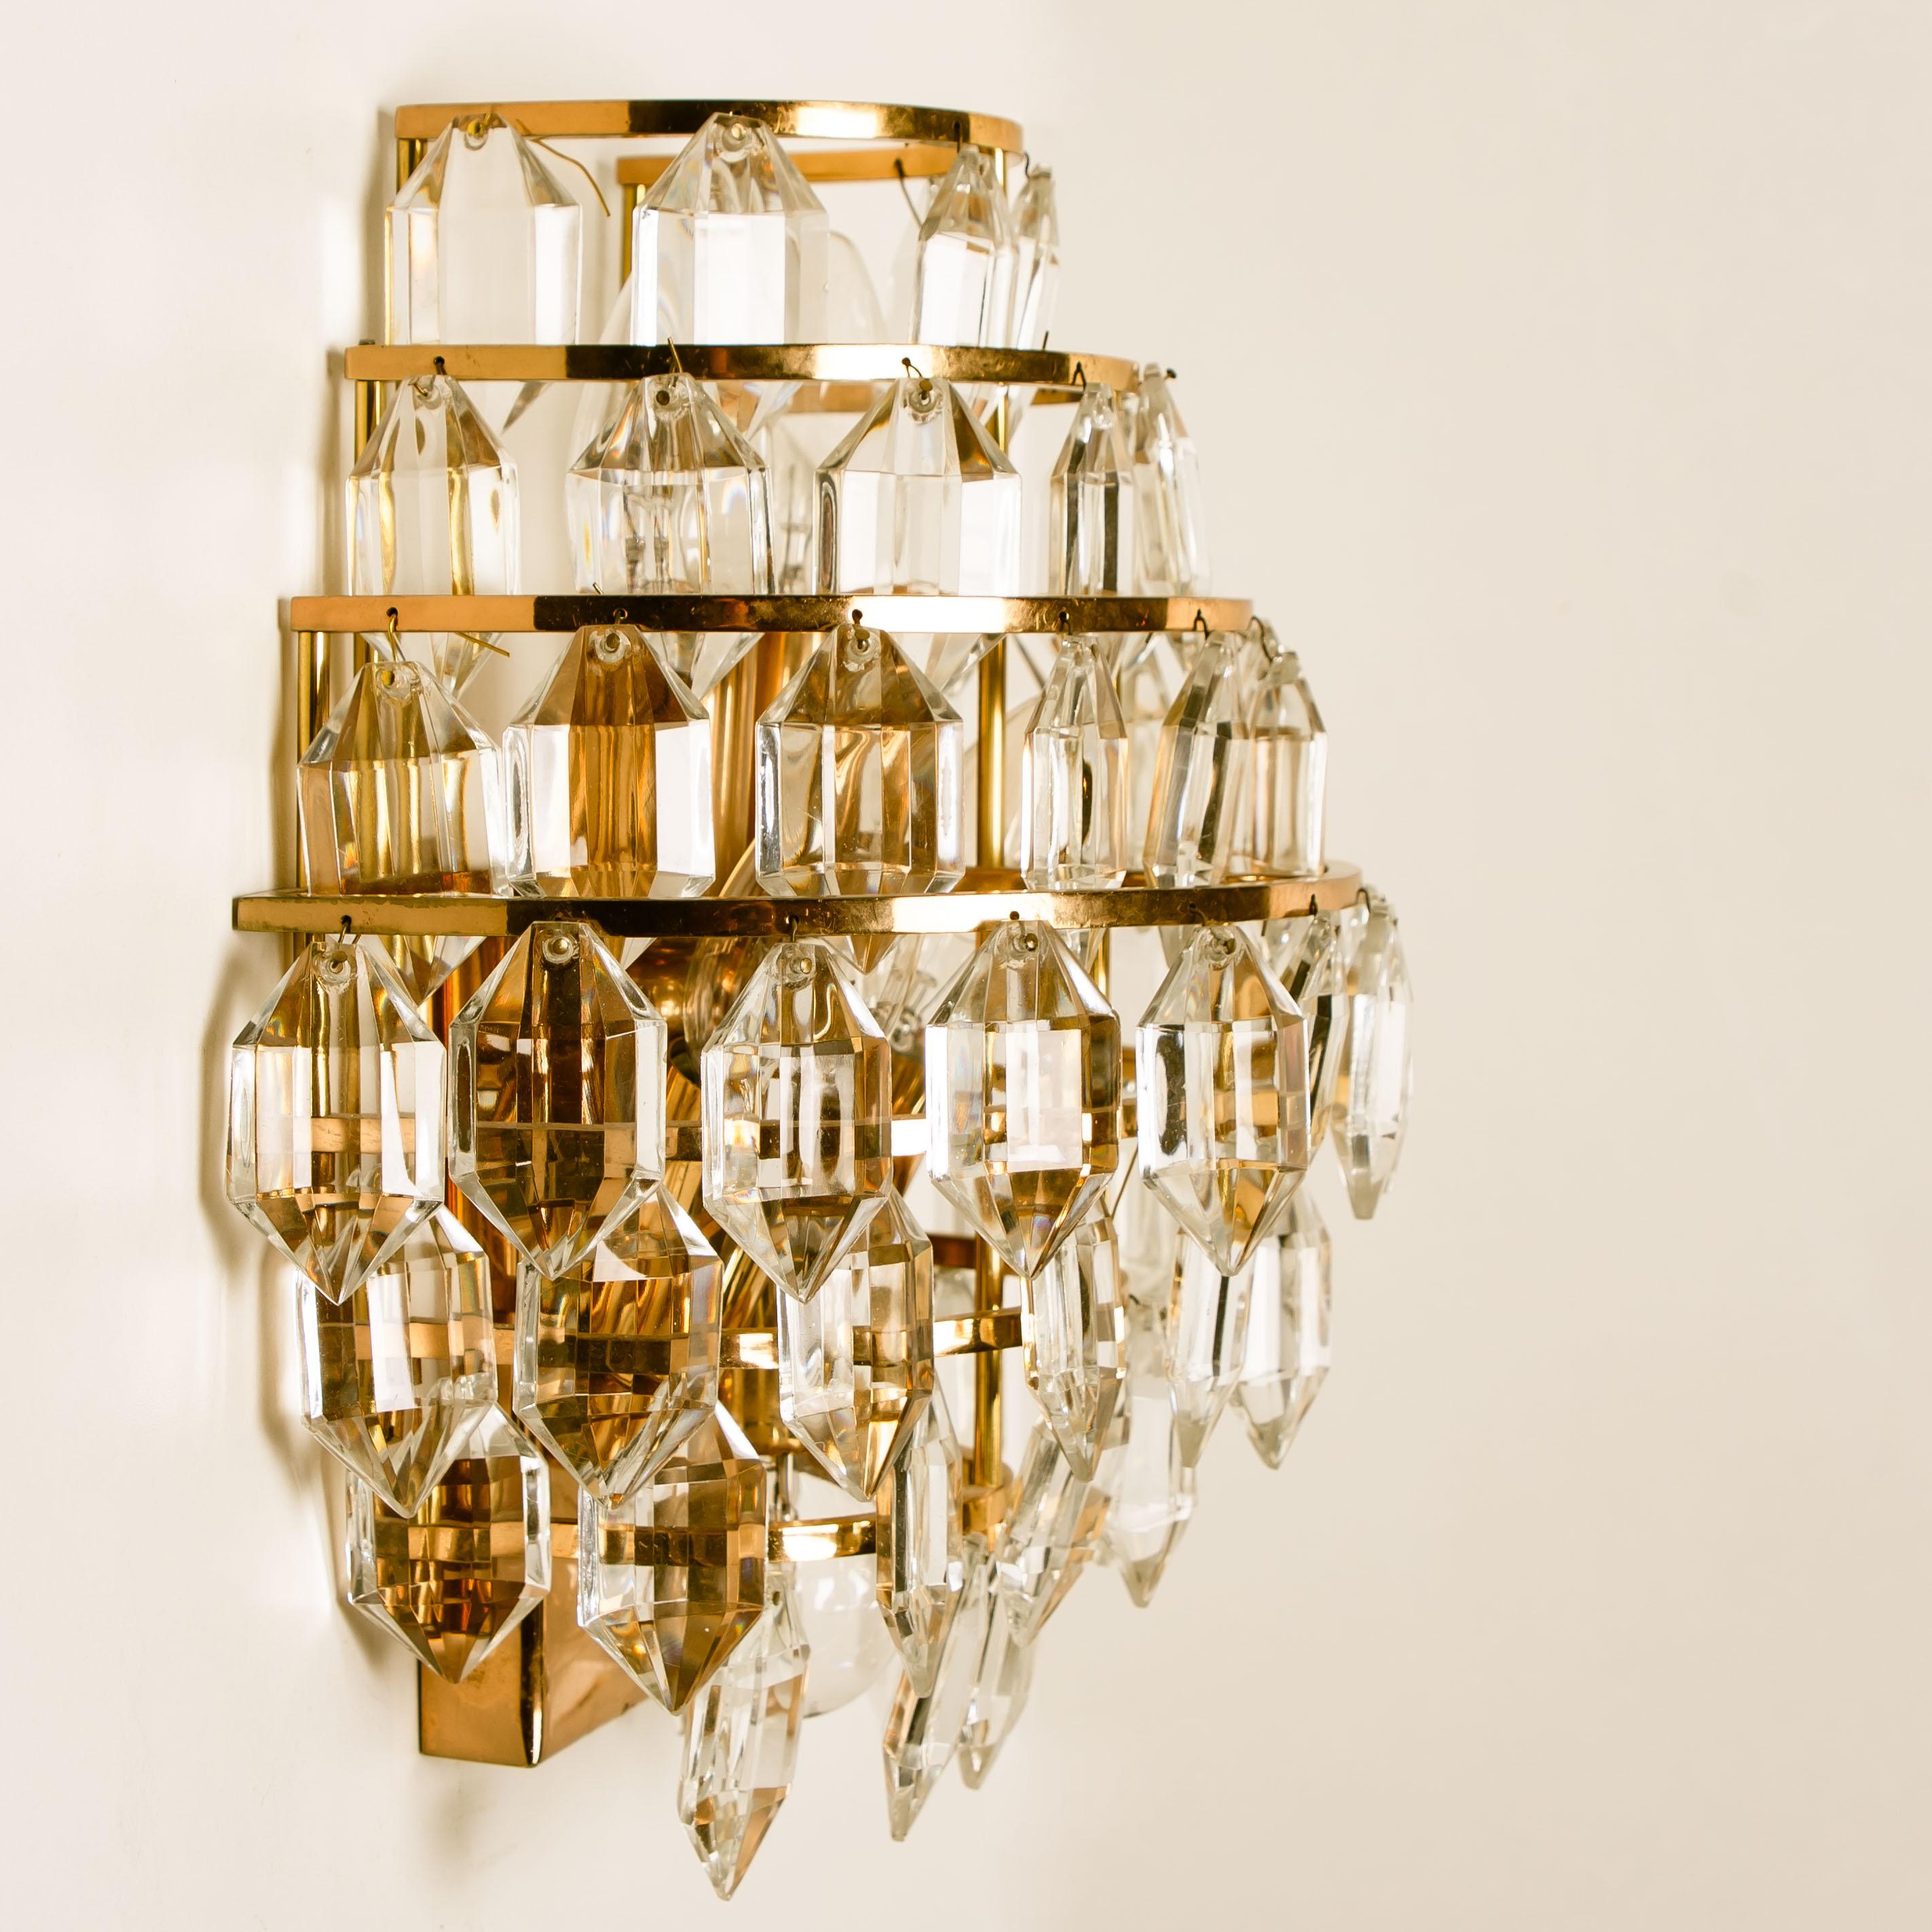 One of the Four Modern Crystal Glass Wall Sconces by Bakalowits, 1960s For Sale 13